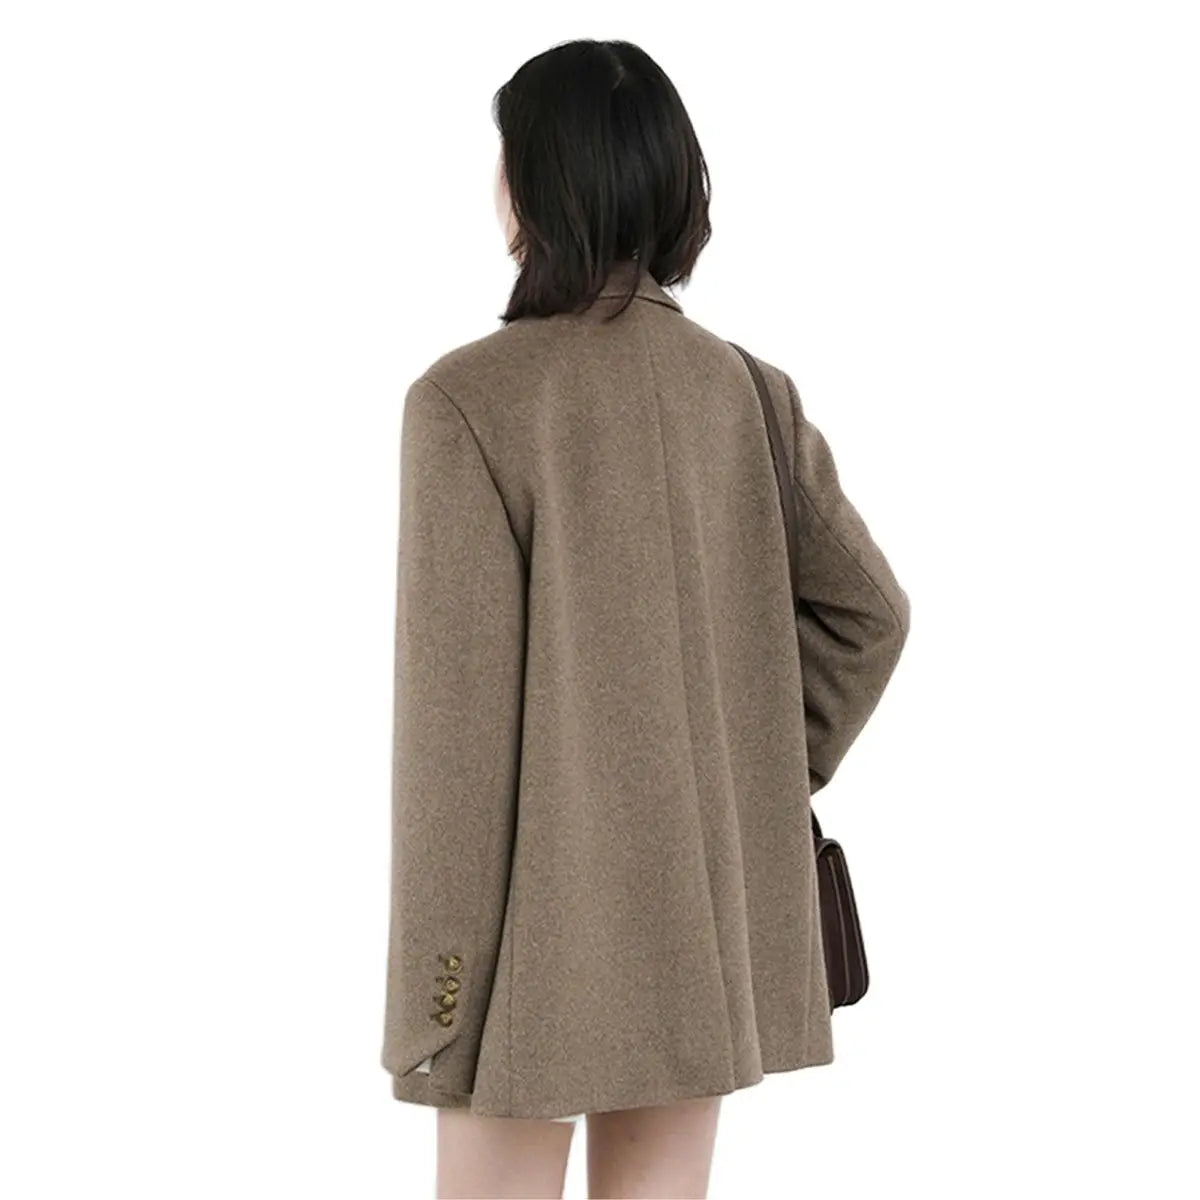 Women's Thick Warm Wool Blend Mid-Long Blazer: Solid Color, Available in 2 Colors